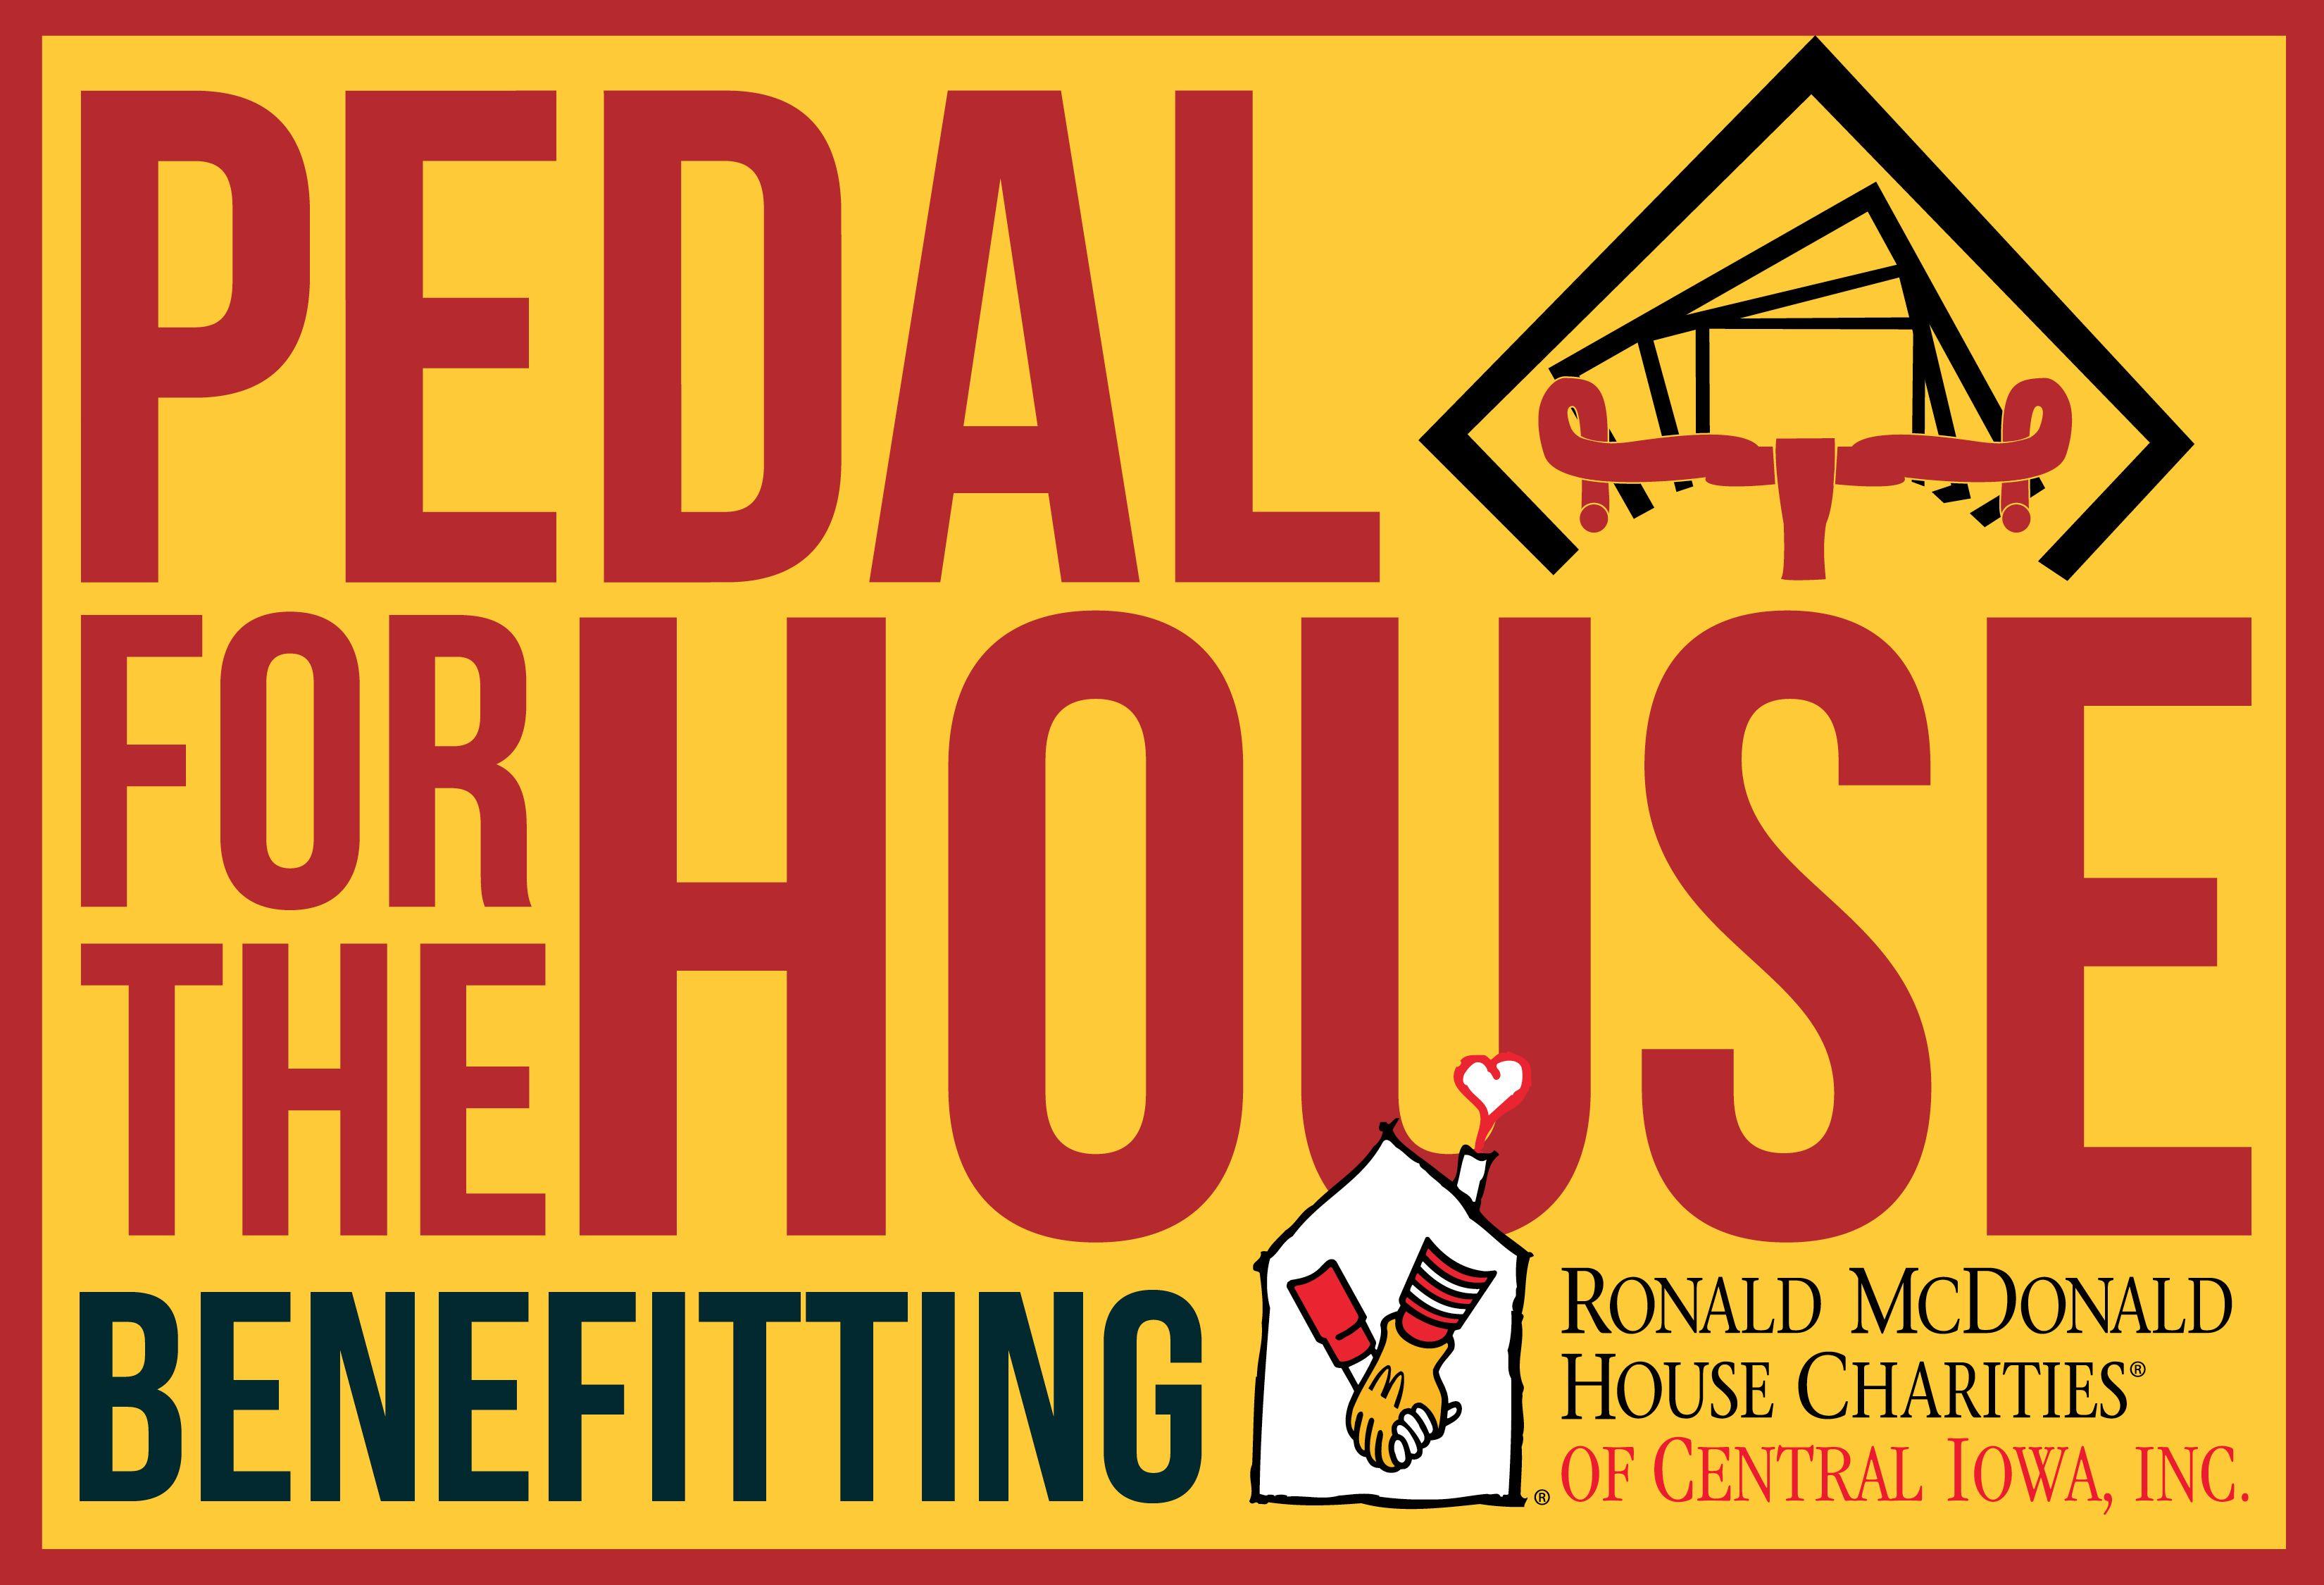 FirstGiving Logo - Pedal for the House First Giving Logo. RMH Des Moines